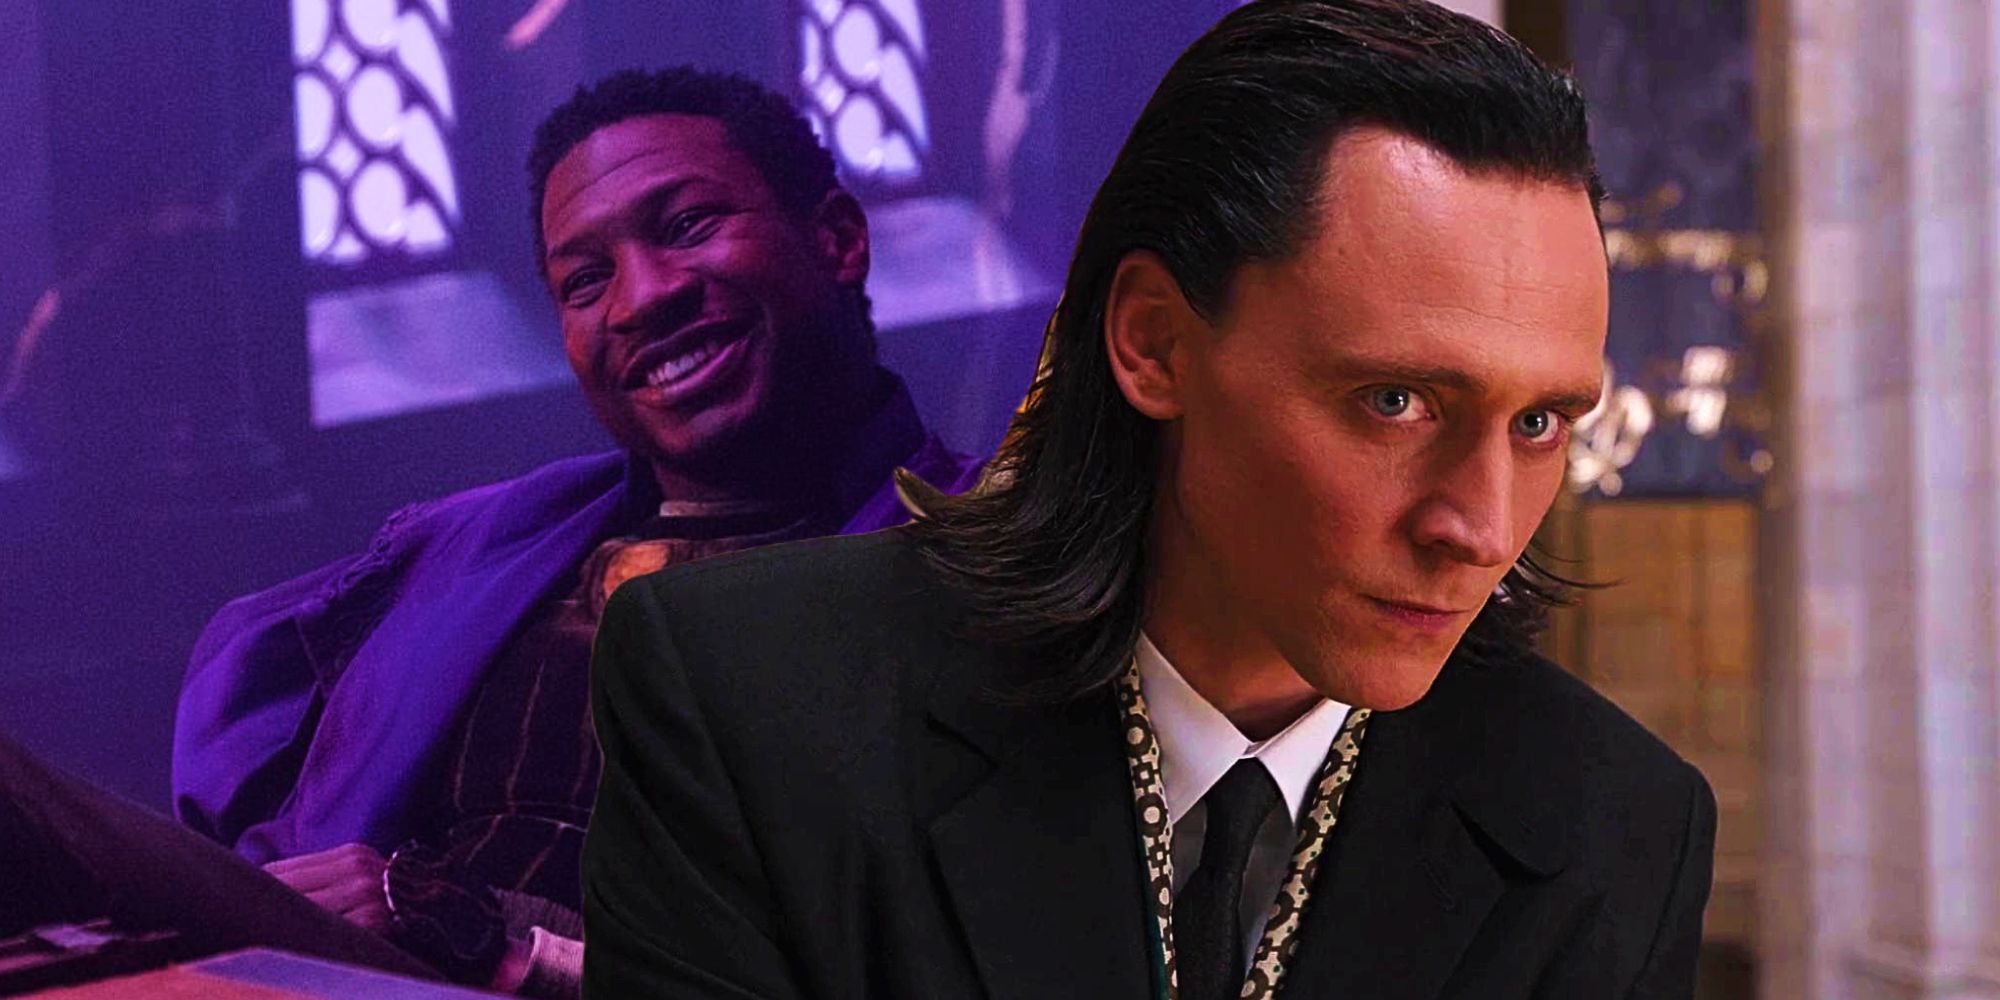 Here's How Loki Will Assemble The Avengers For Kang Dynasty